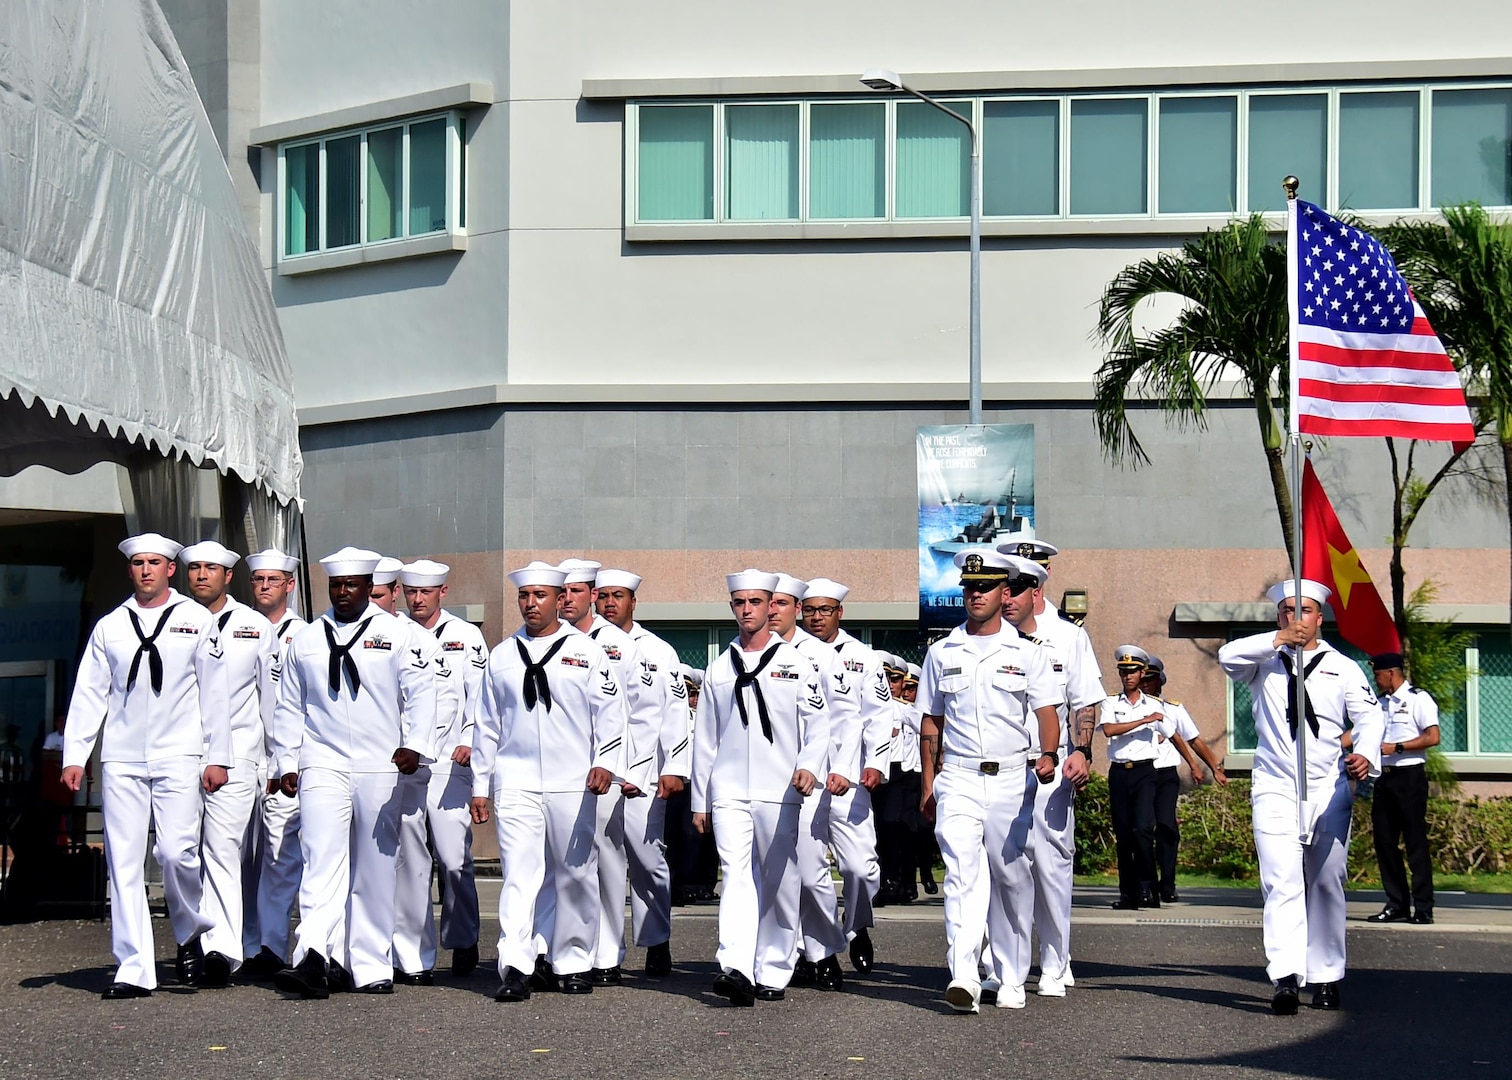 Sailors assigned to the Arleigh Burke-class guided missile destroyer USS Sterett (DDG 104) march in formation at the international honor guard delegation during the International Maritime Review and 50th anniversary of the Republic of Singapore Navy at RSS Singapura-Changi Naval Base, May 15, 2017. The International Maritime Defense Exhibition 2017 is hosted by the Republic of Singapore and is one of the largest maritime exhibitions in the Asia Pacific and features a trade show and a series of multilateral exercises and exchanges. 